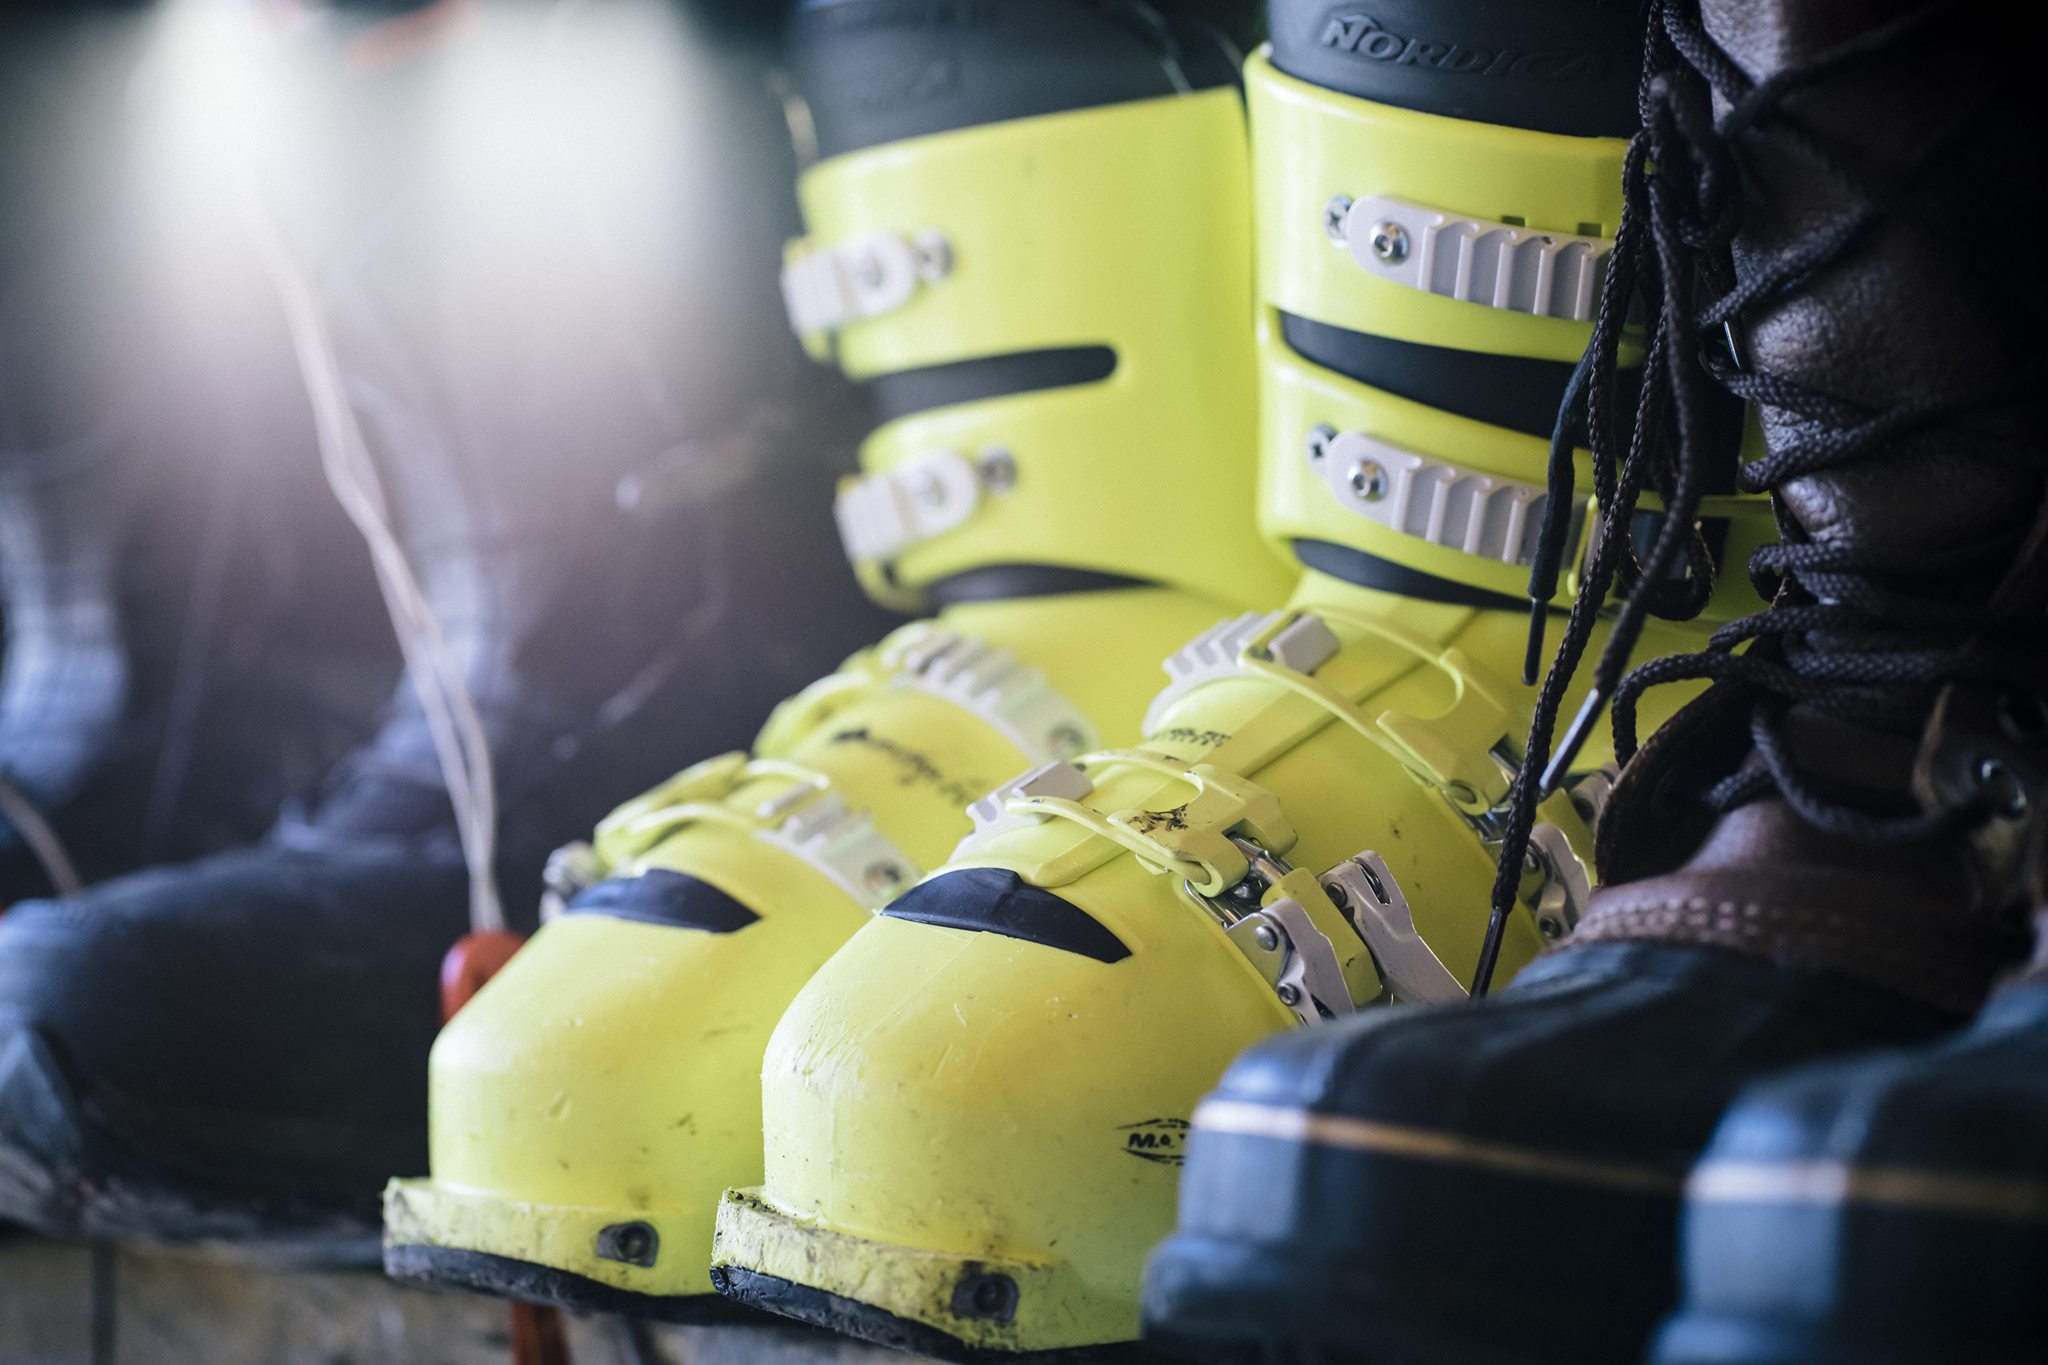 terrace reform crawl Choosing the right size of ski boots